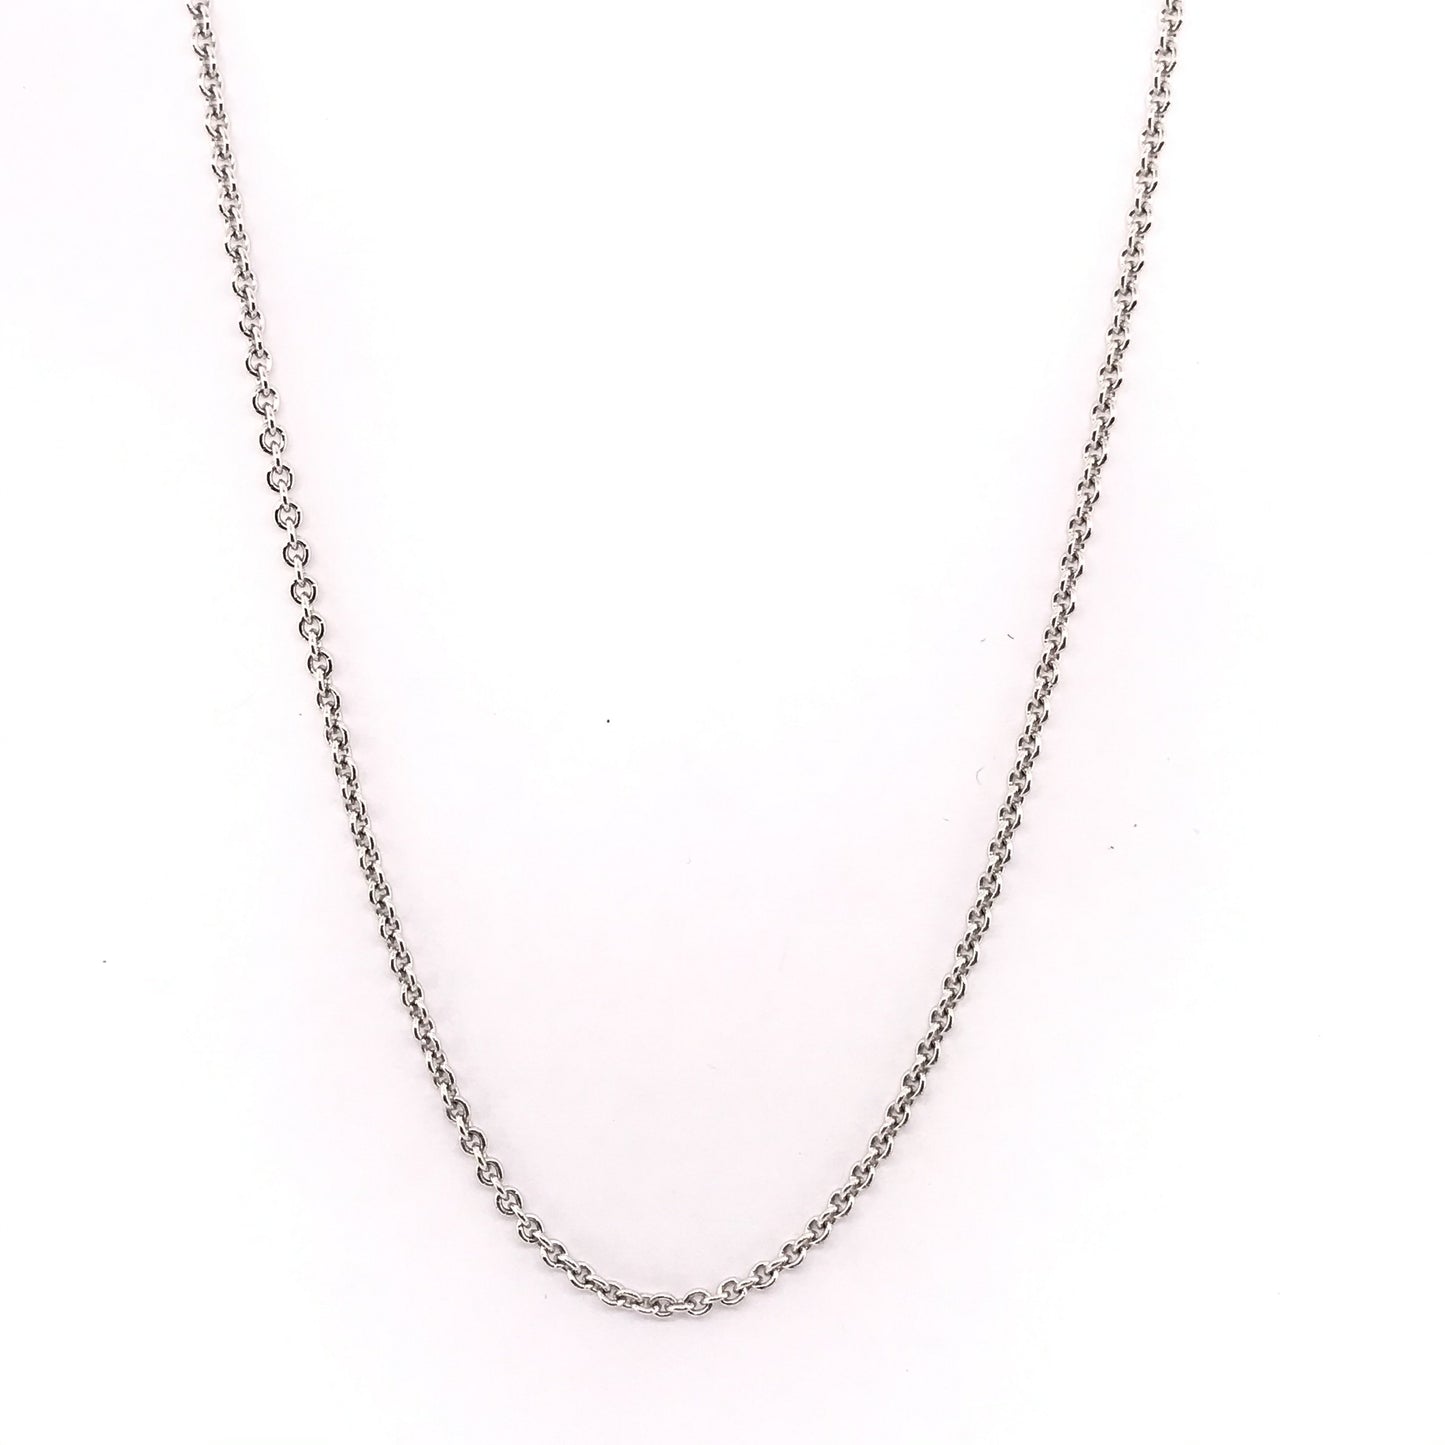 18K WHITE GOLD NECKLACE ROLO HEAVY CHAIN